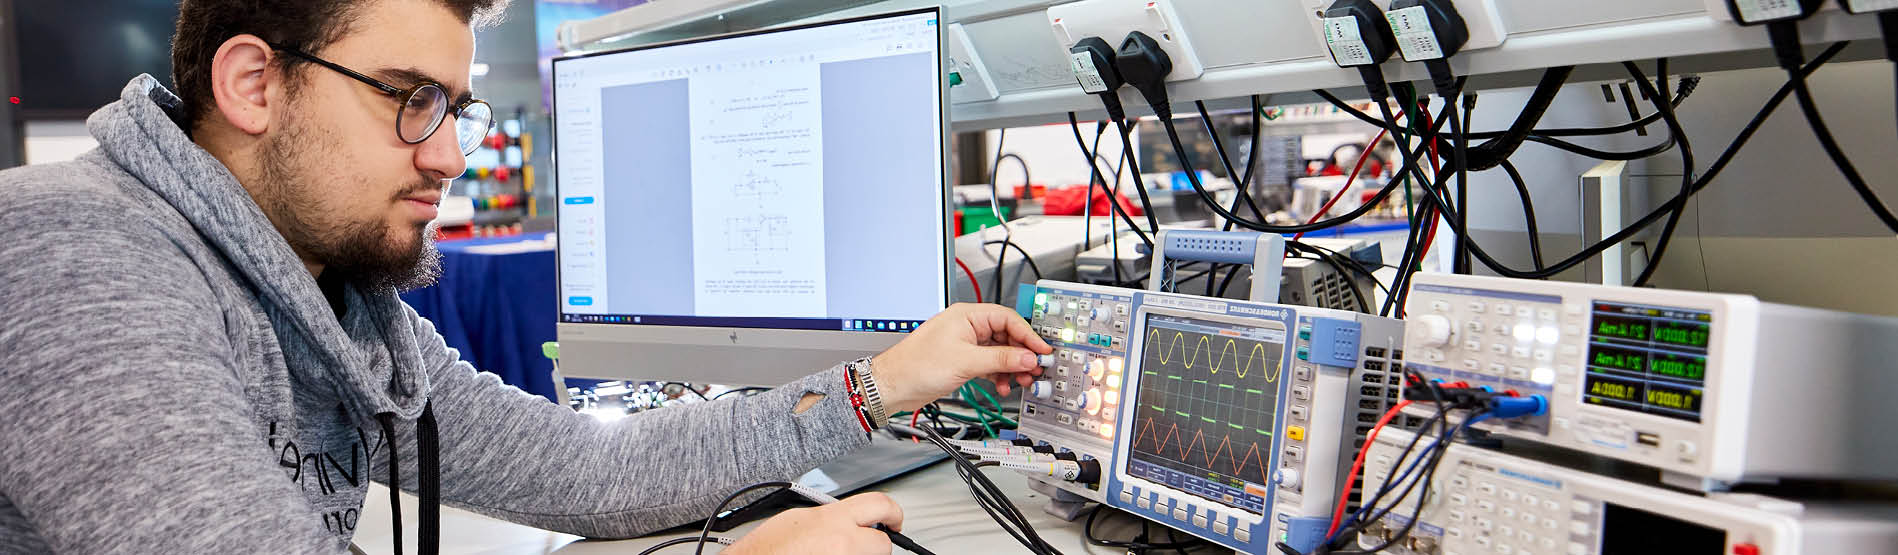 electronic engineering research 